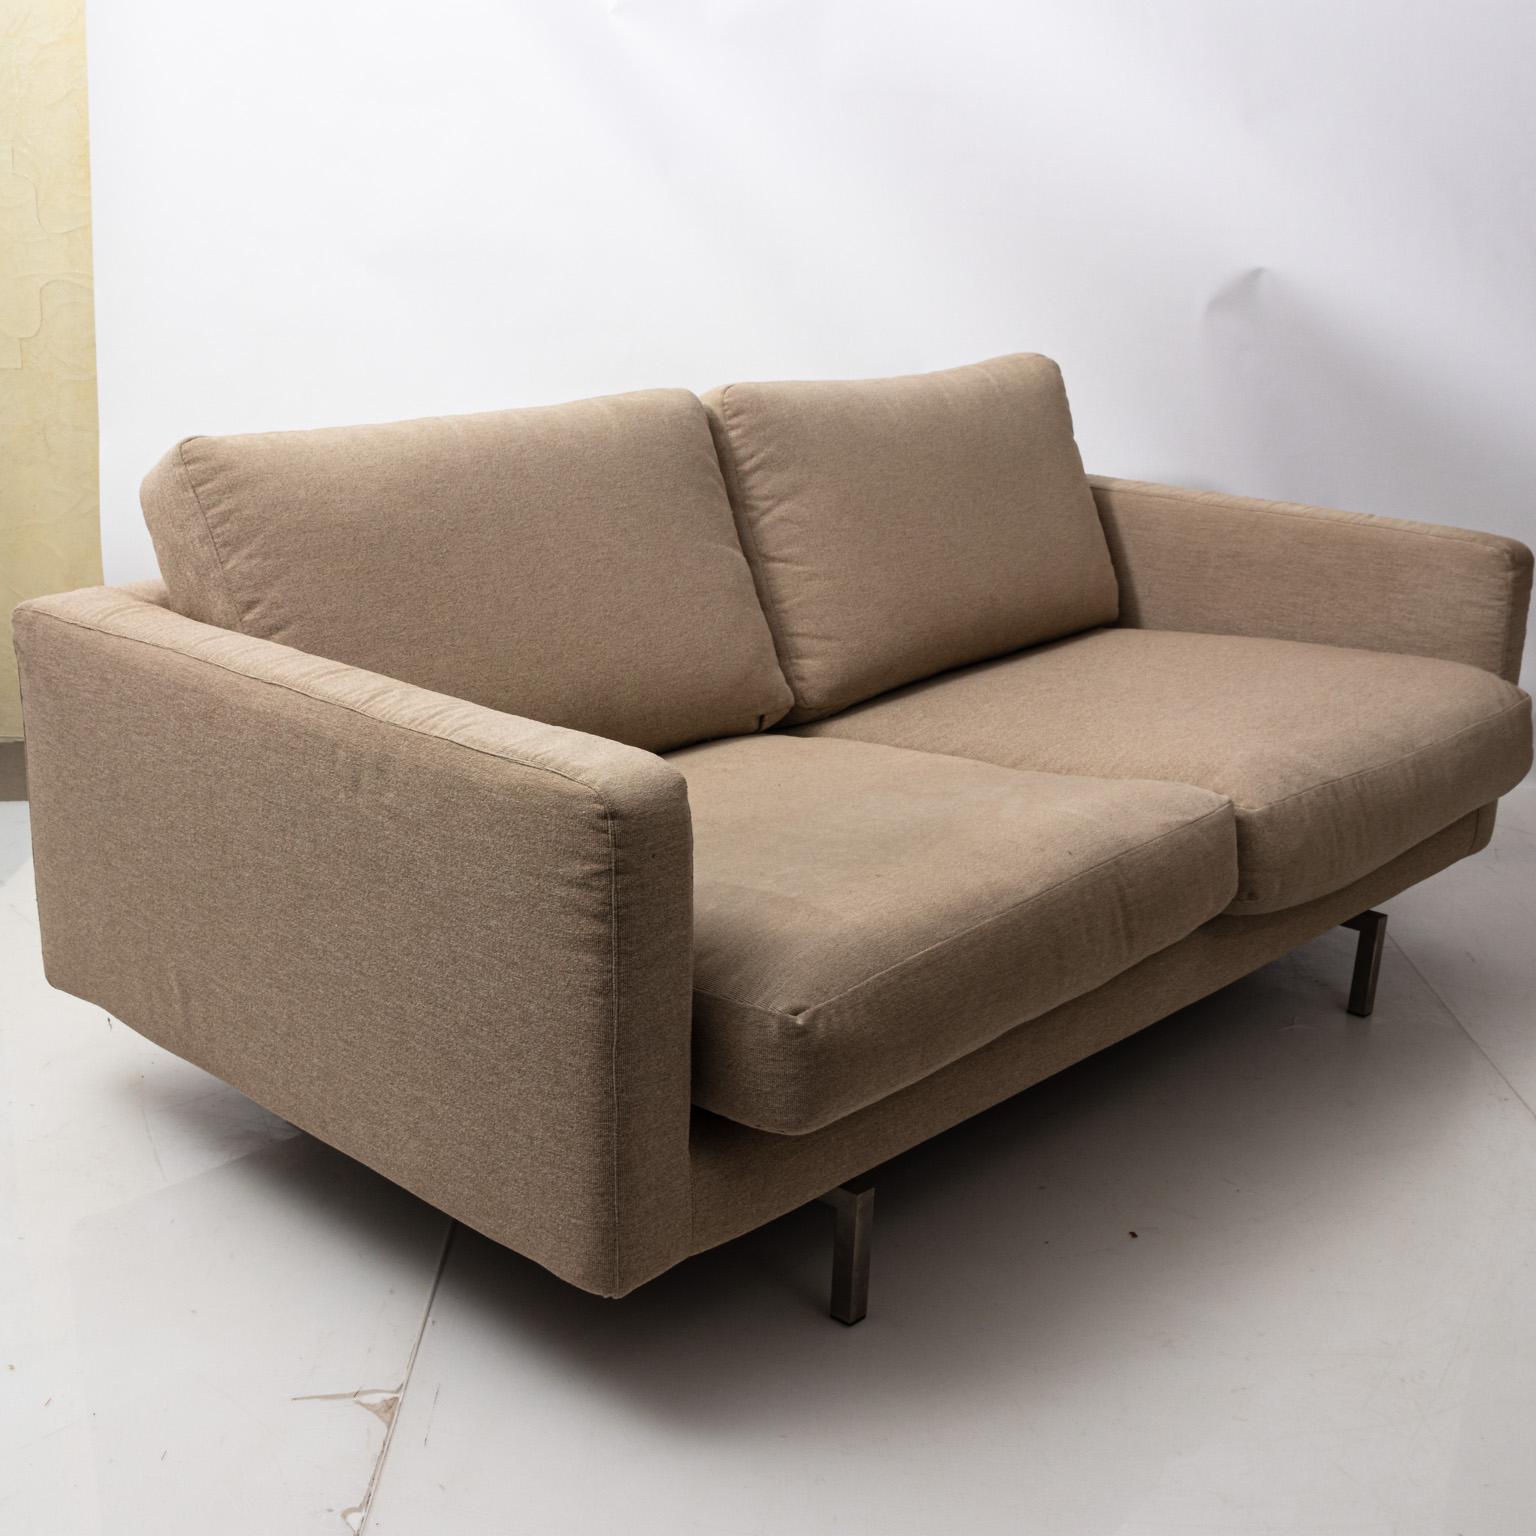 Modern two-seat loveseat by Niels Bendtsen for Bensen with nickel plated steel legs and removable fabric covers to dry clean, circa 2003. Please note of wear consistent with age including minor oxidation to the steel legs and used condition to